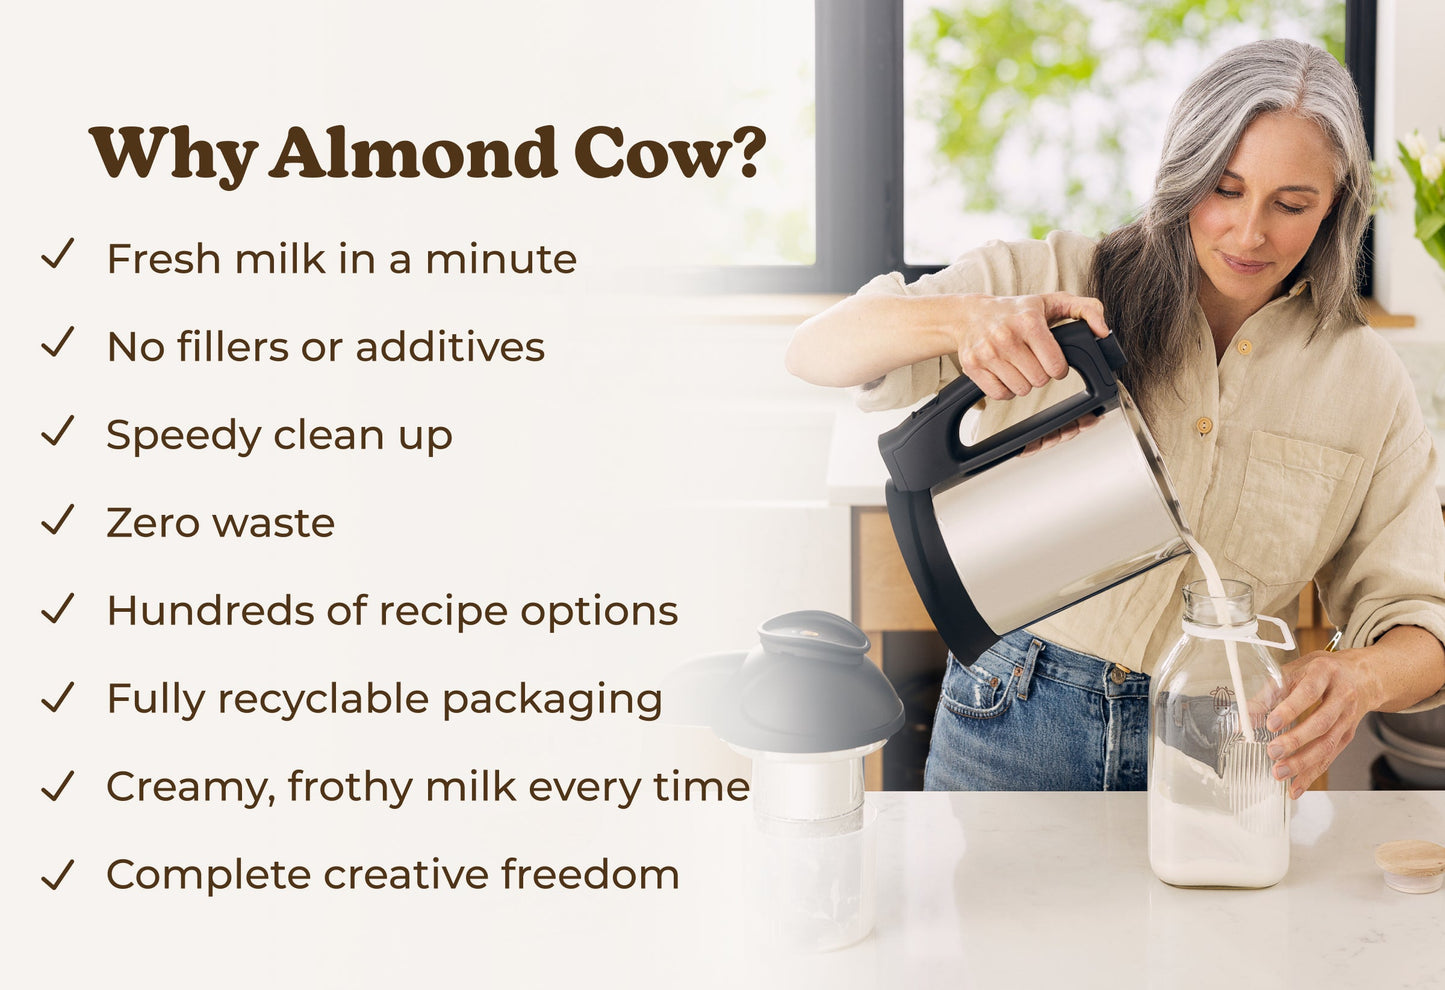 The Milk Maker by Almond Cow